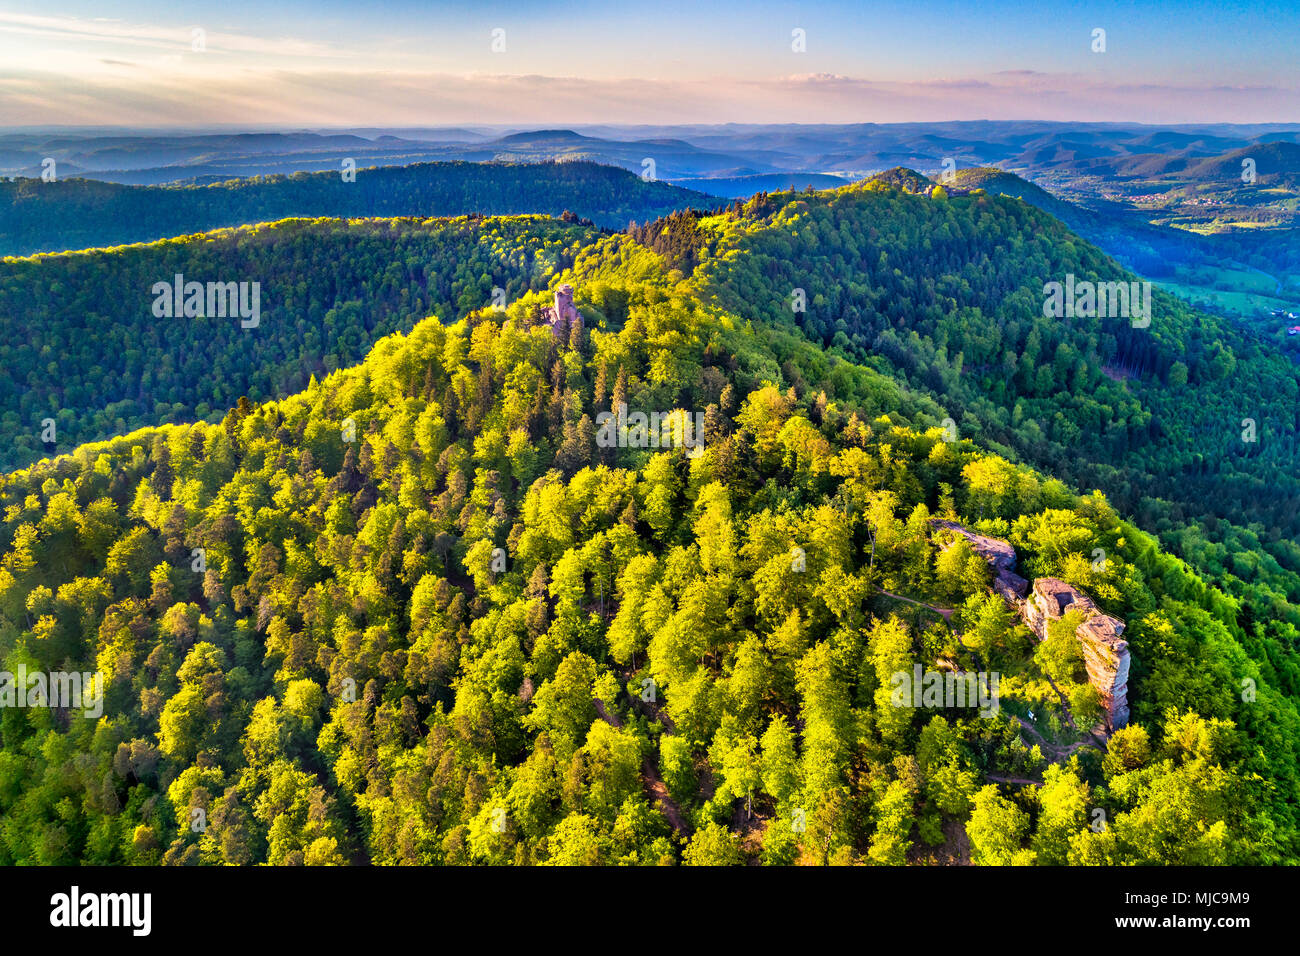 Chateau de Loewenstein, a ruined castle in the Northern Vosges Mountains - Bas-Rhin, Alsace, France Stock Photo